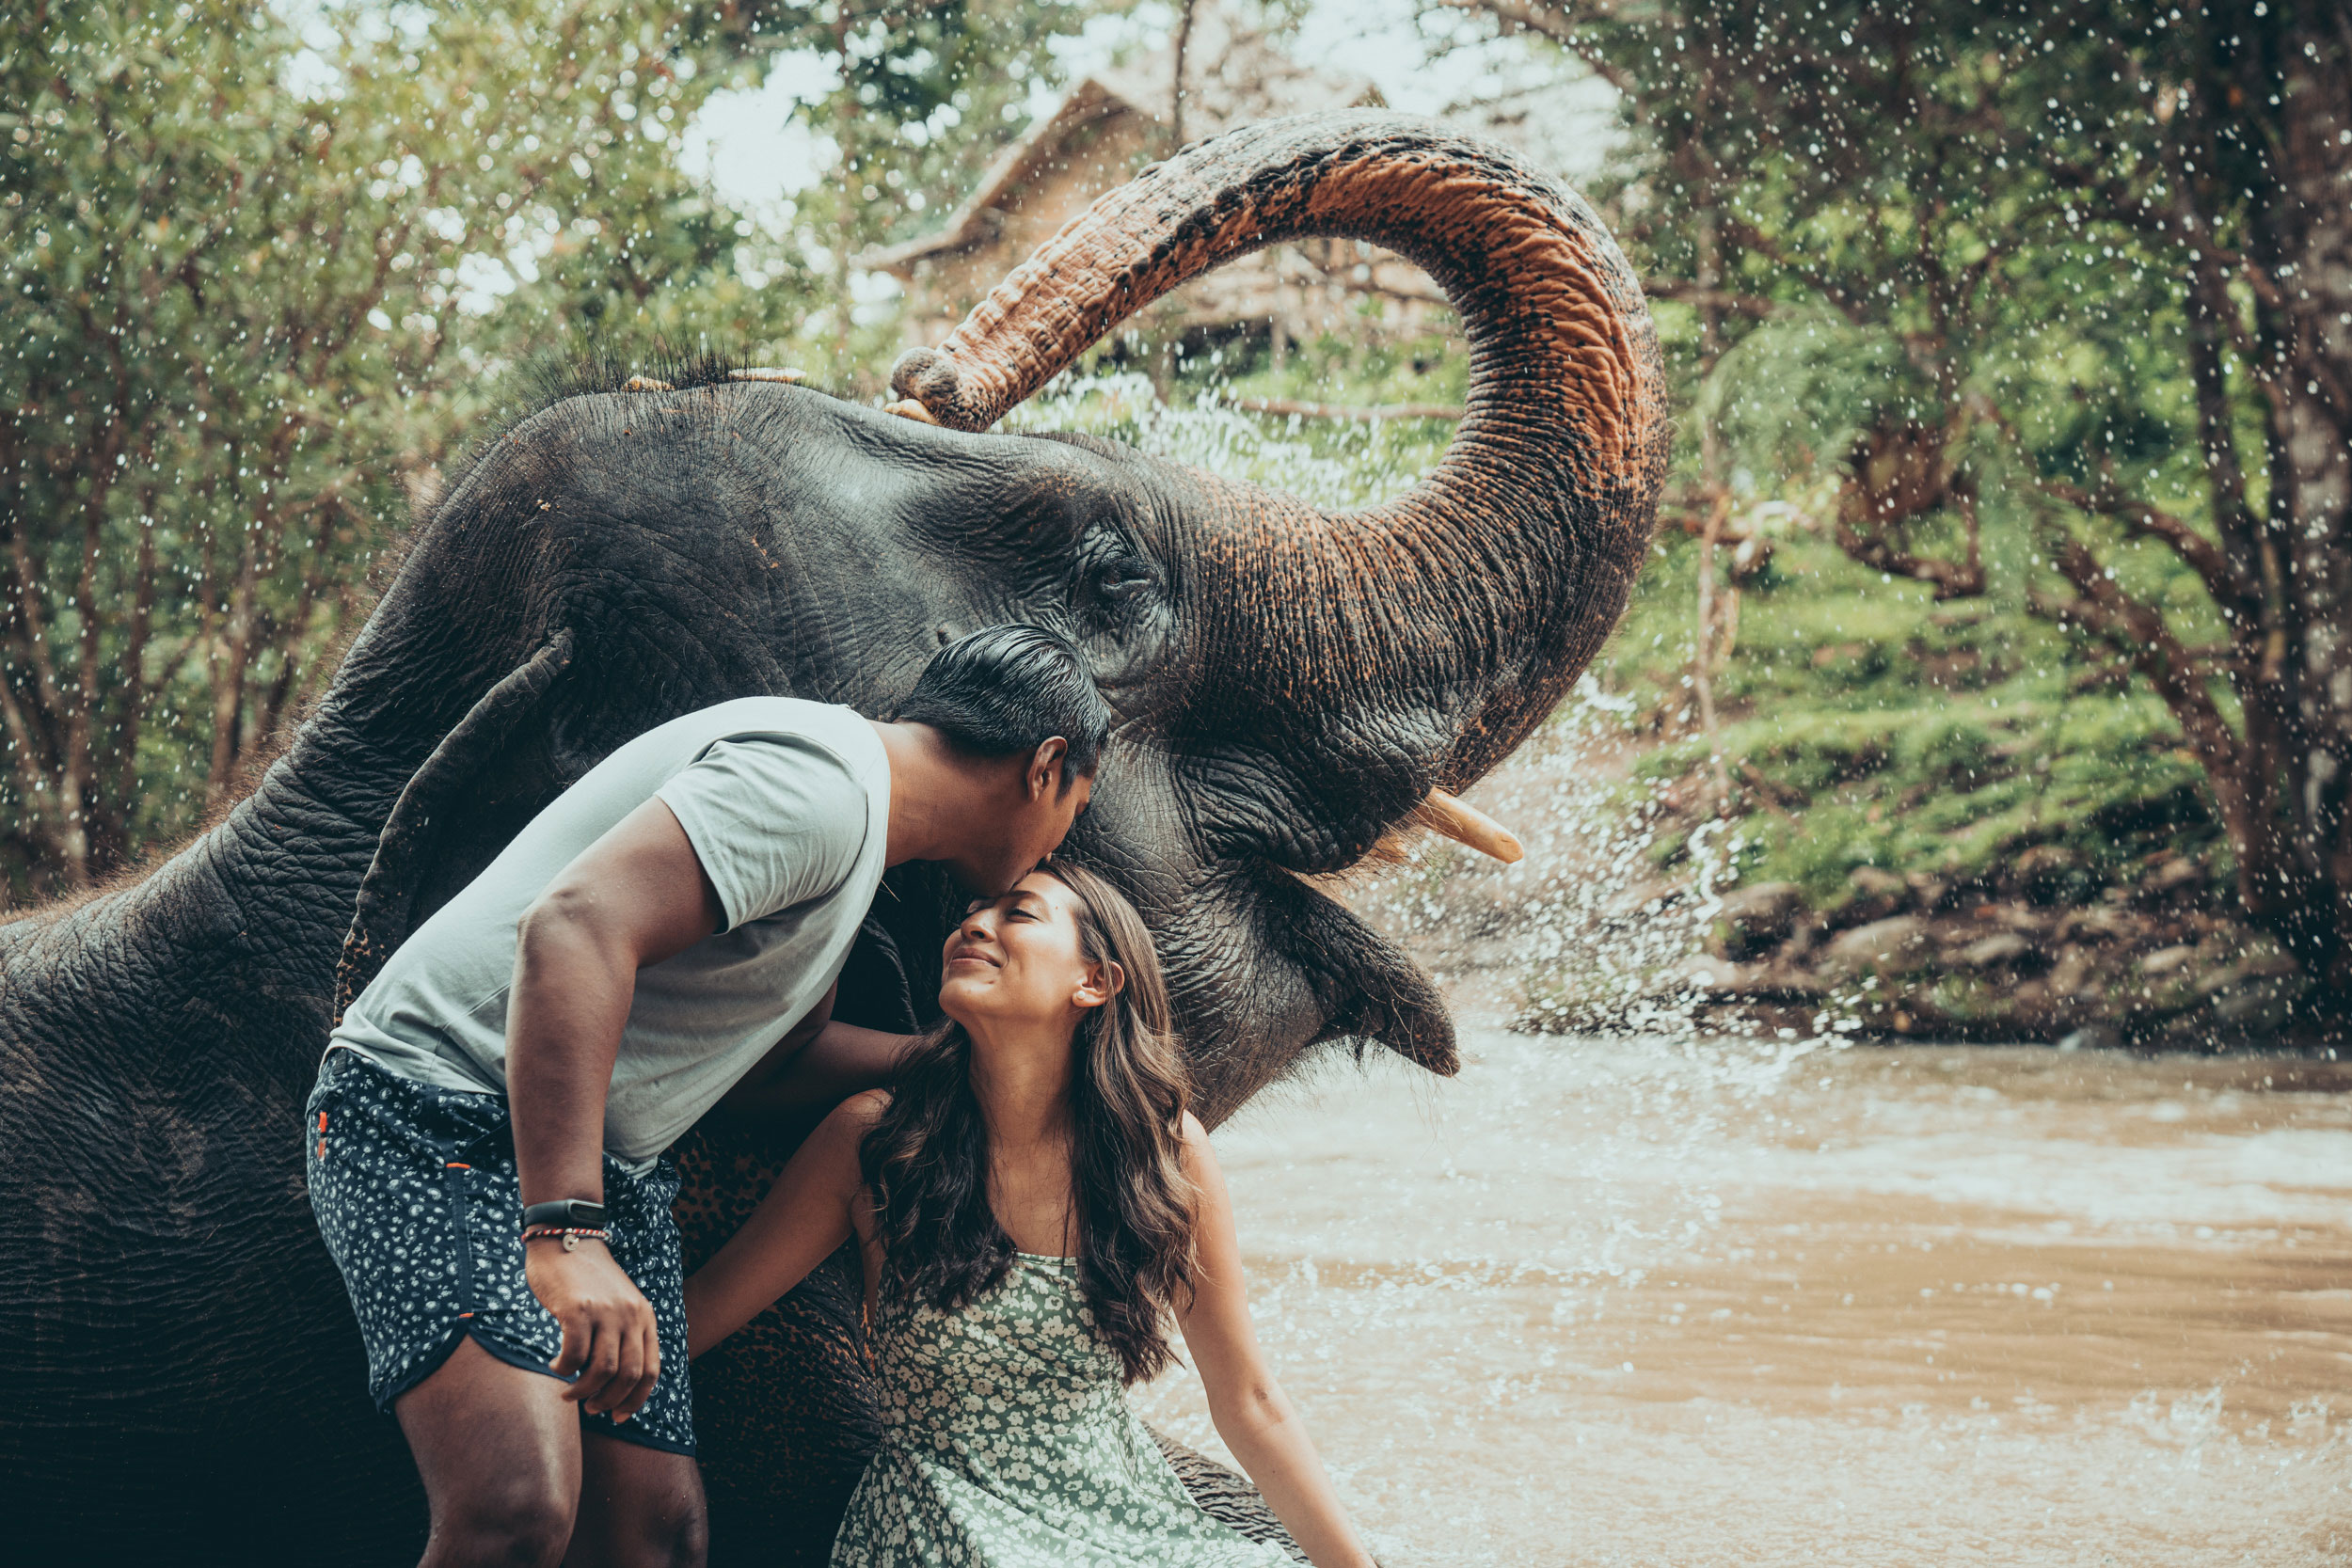 Romantic portrait taken in a river with an elephant